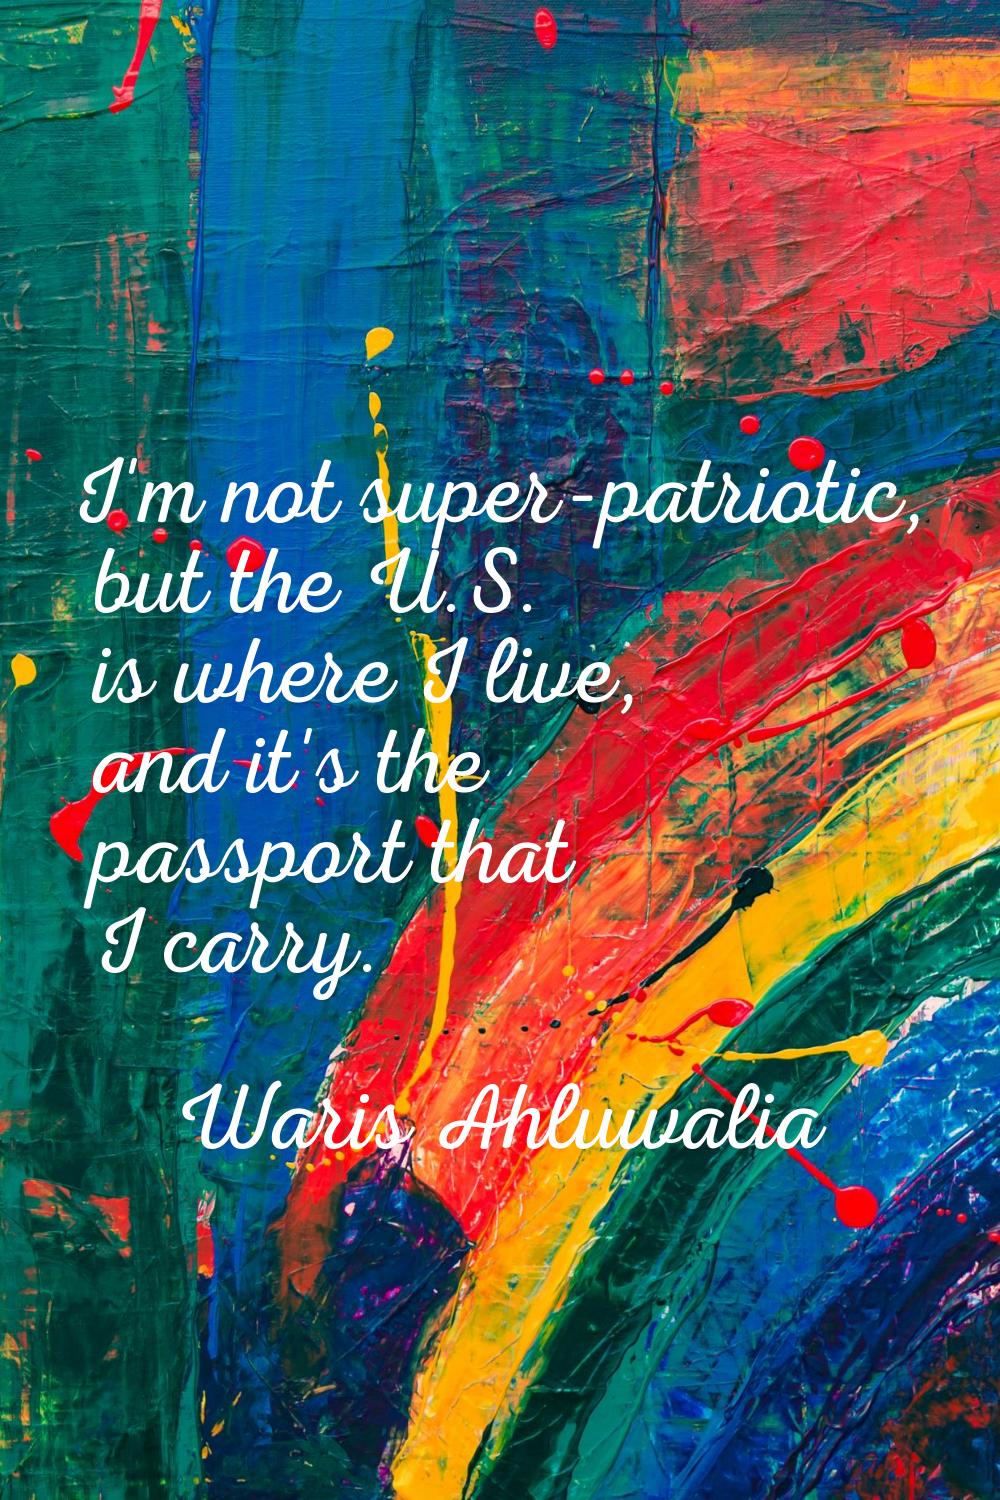 I'm not super-patriotic, but the U.S. is where I live, and it's the passport that I carry.